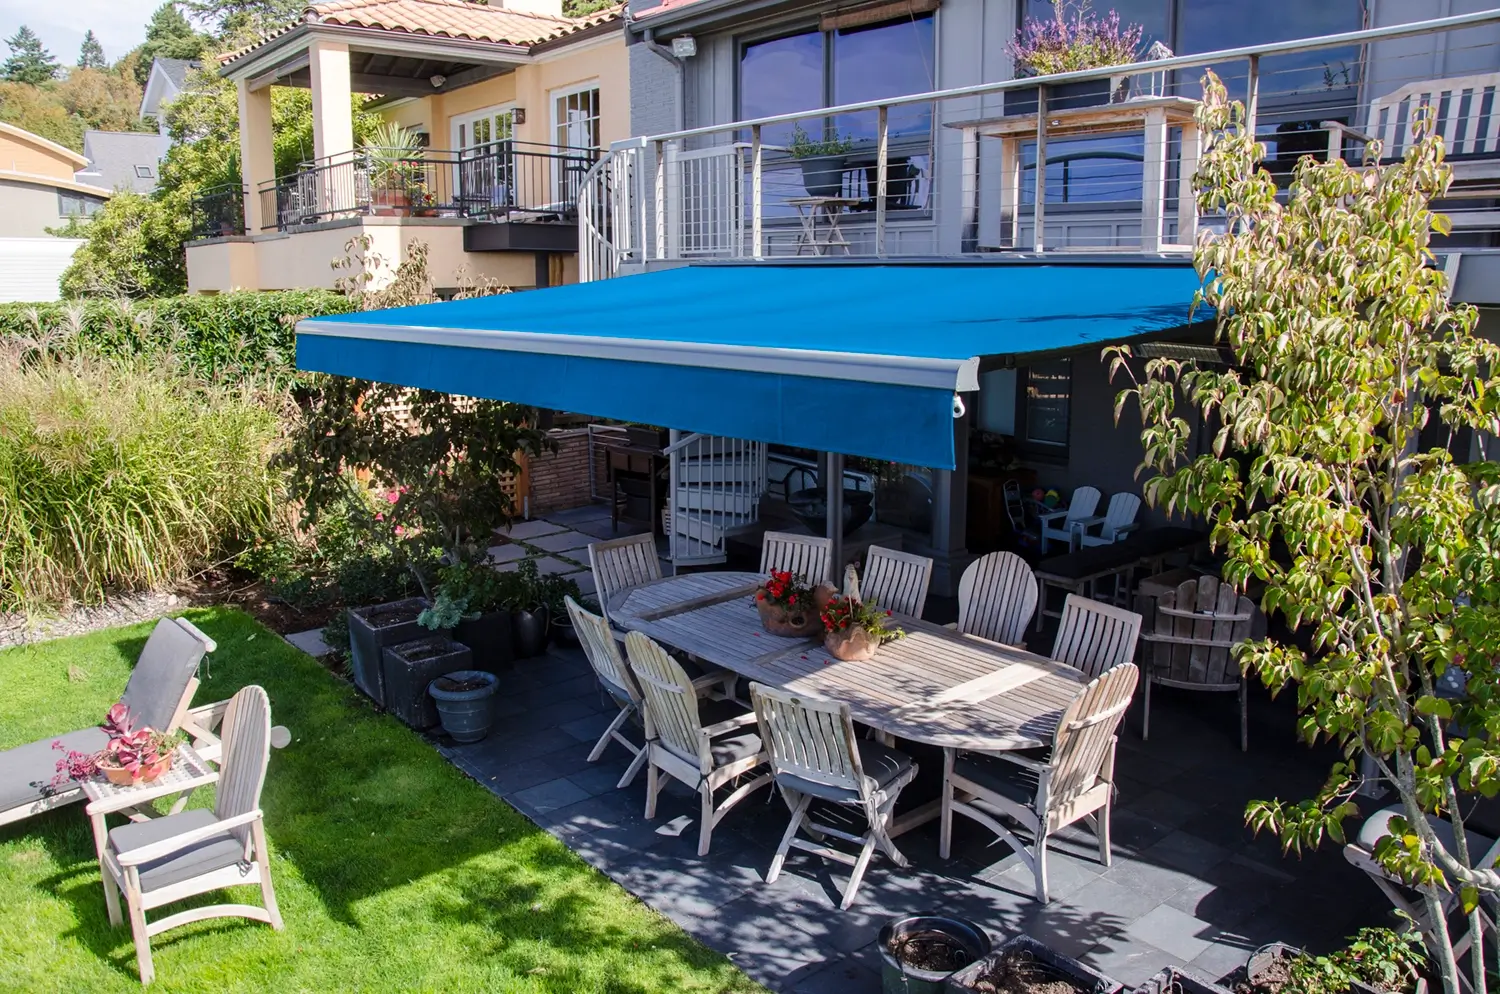 7 Tips to Help You Enjoy Your Patio All Year